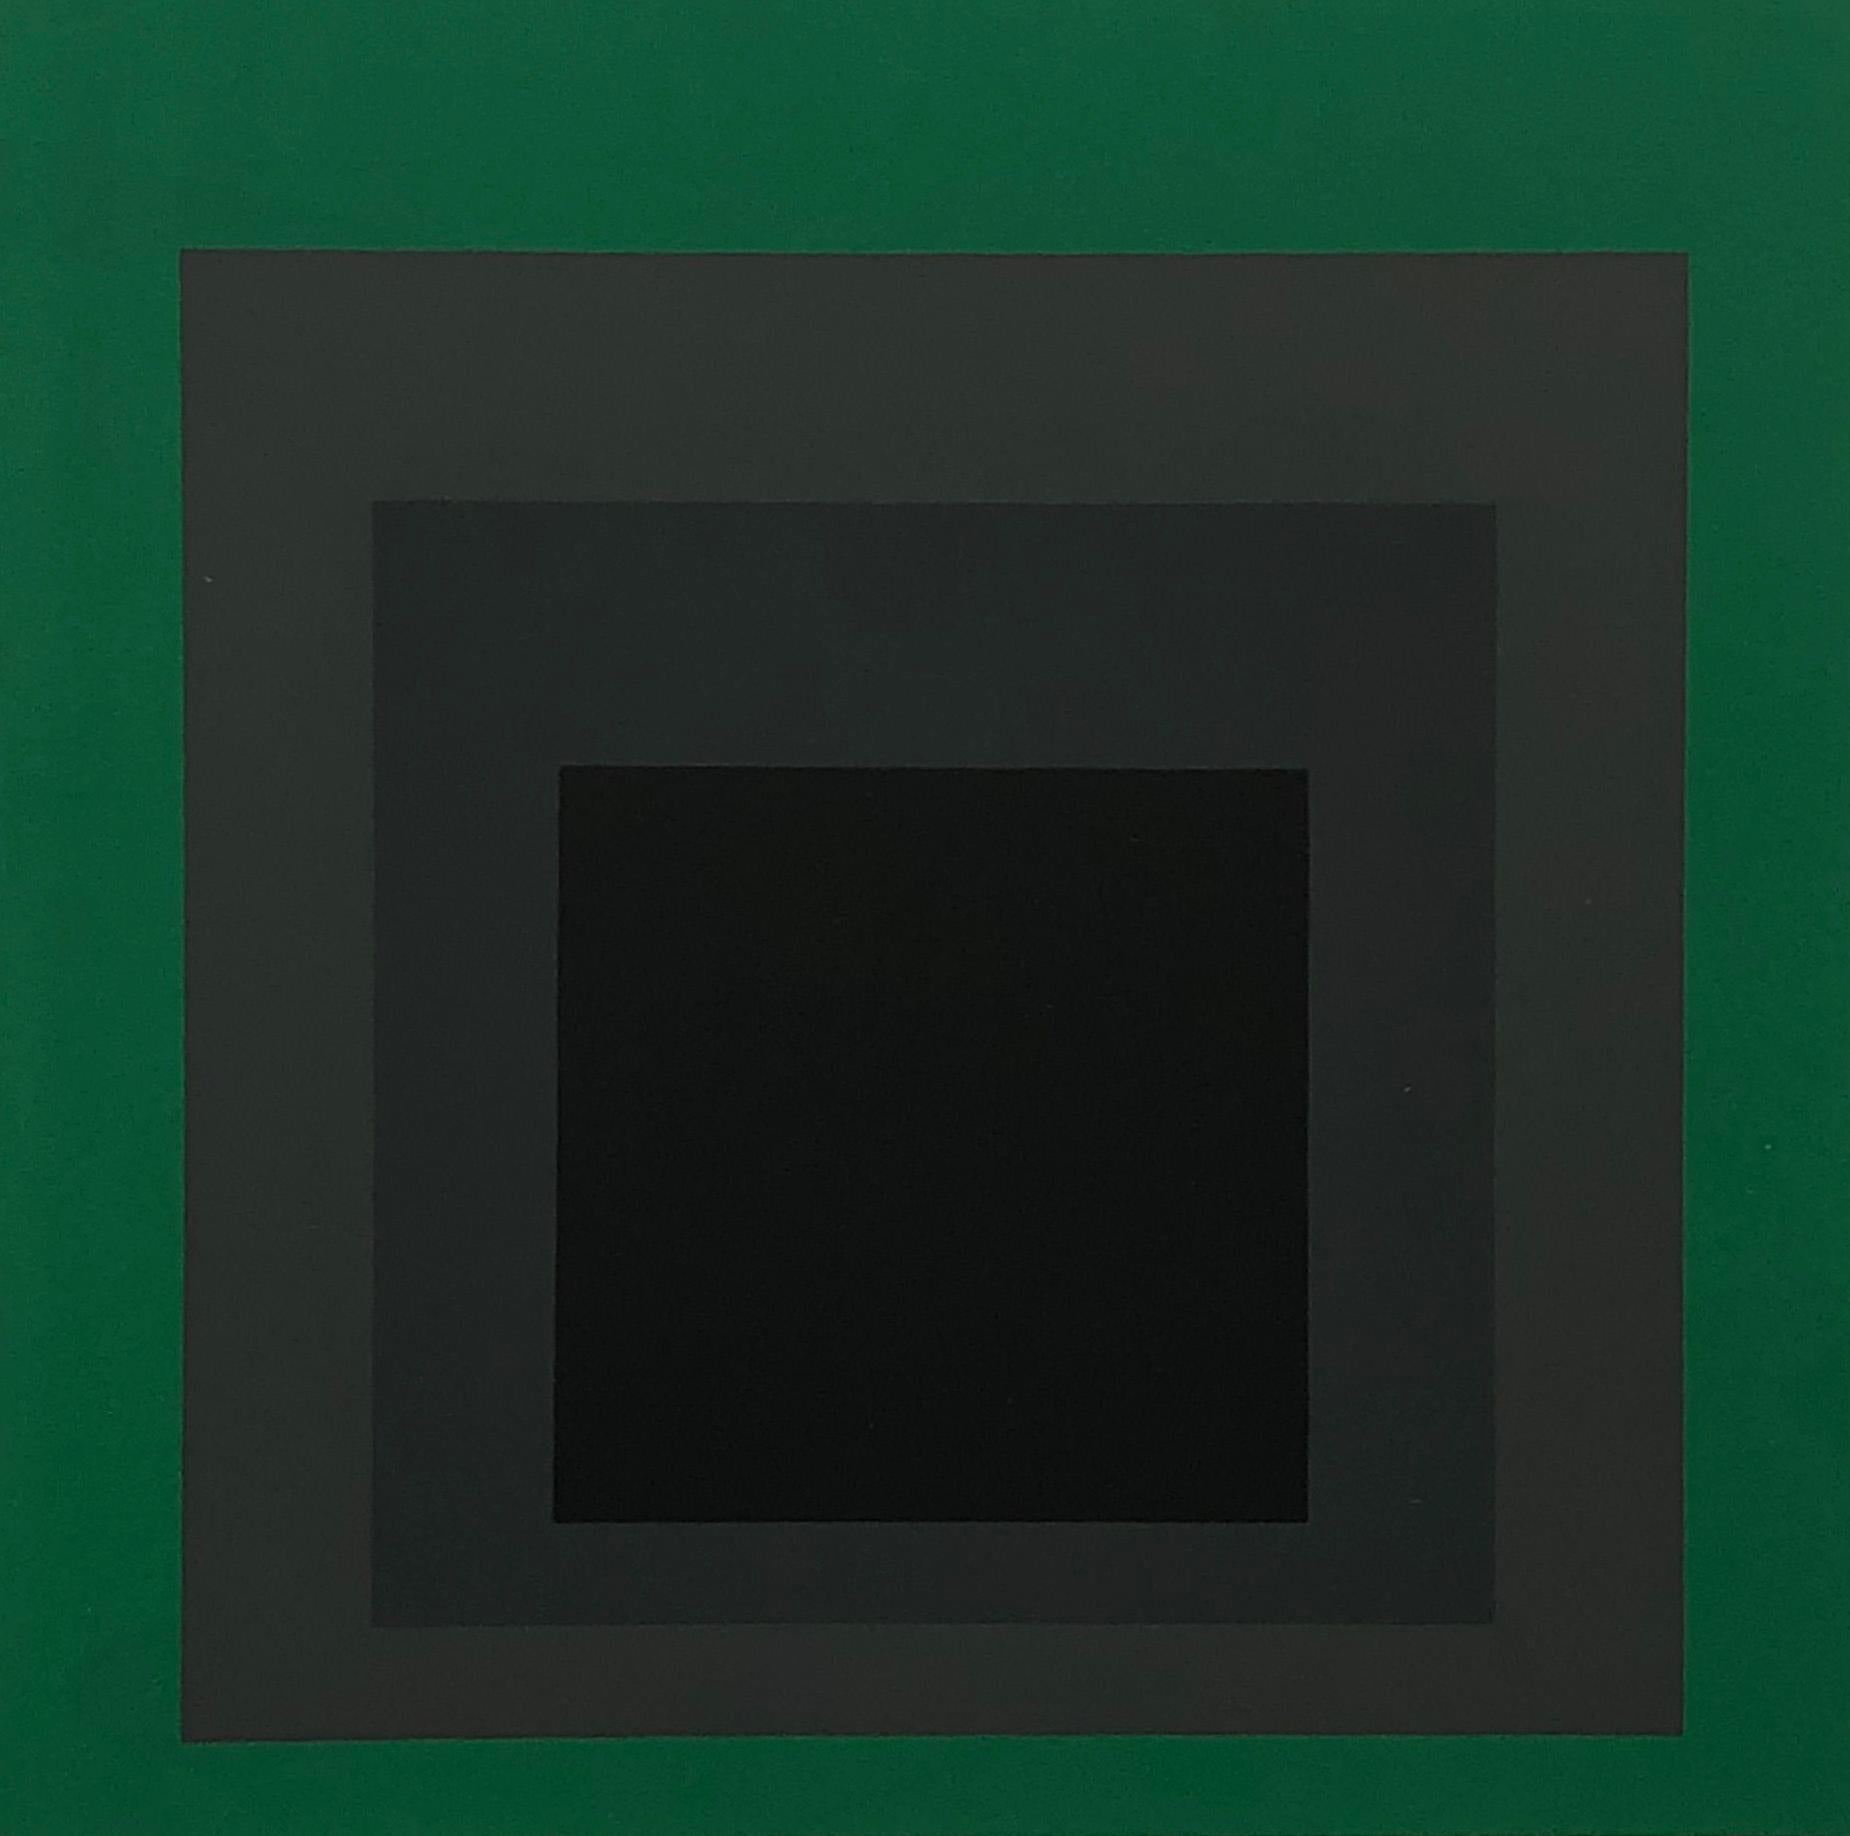 Josef Albers Homage to the Square screen-print 1977 (Josef Albers prints)  - Print by (after) Josef Albers